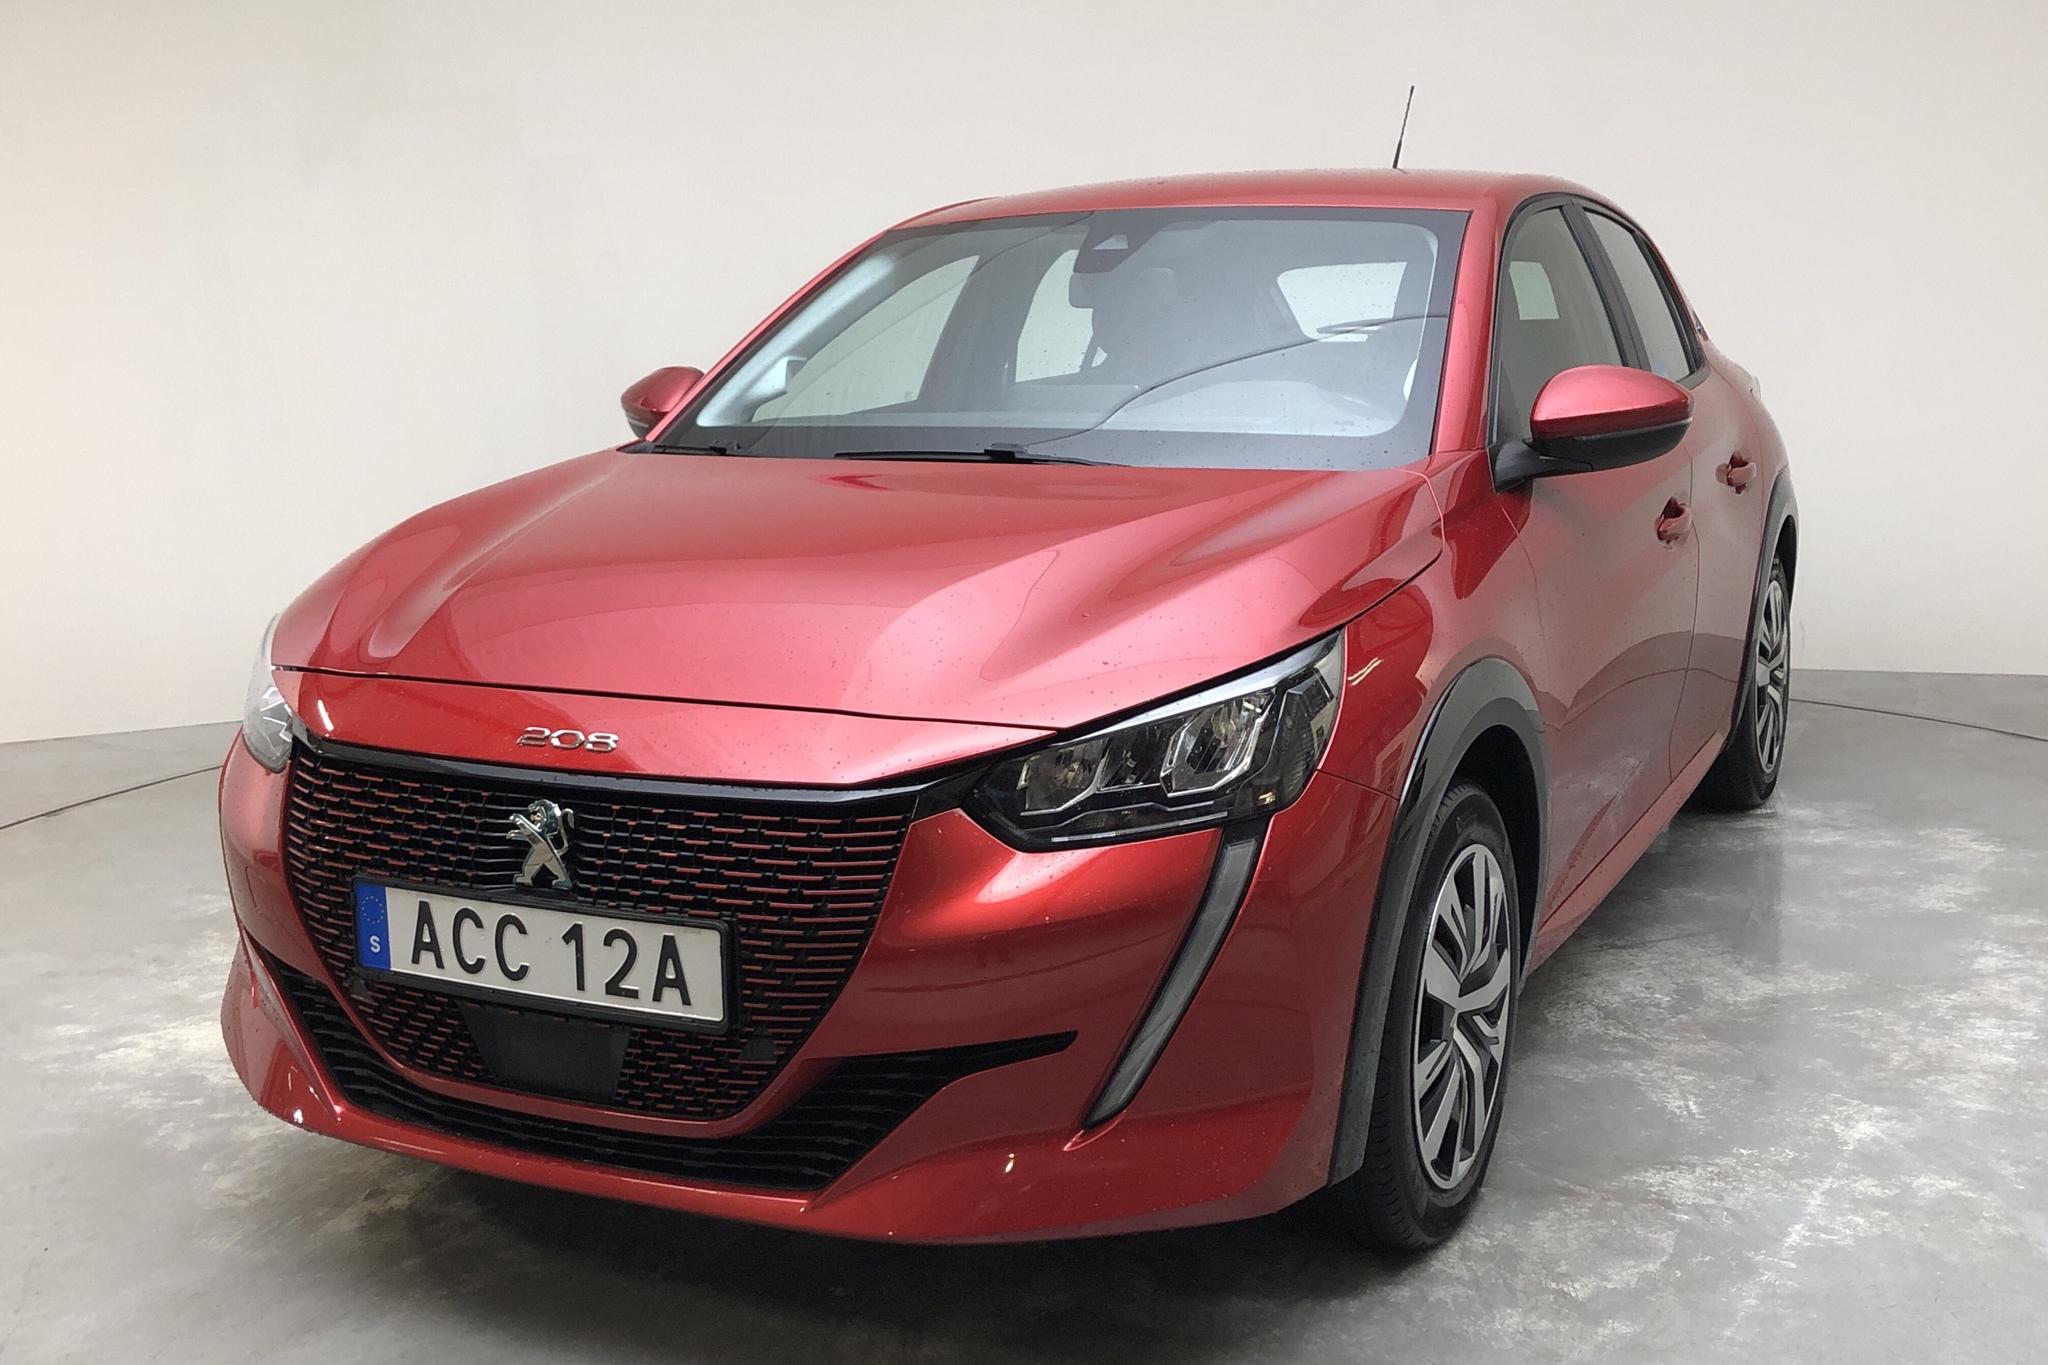 Peugeot e-208 50 kWh 5dr (136hk) - 56 530 km - Automatic - red - 2020